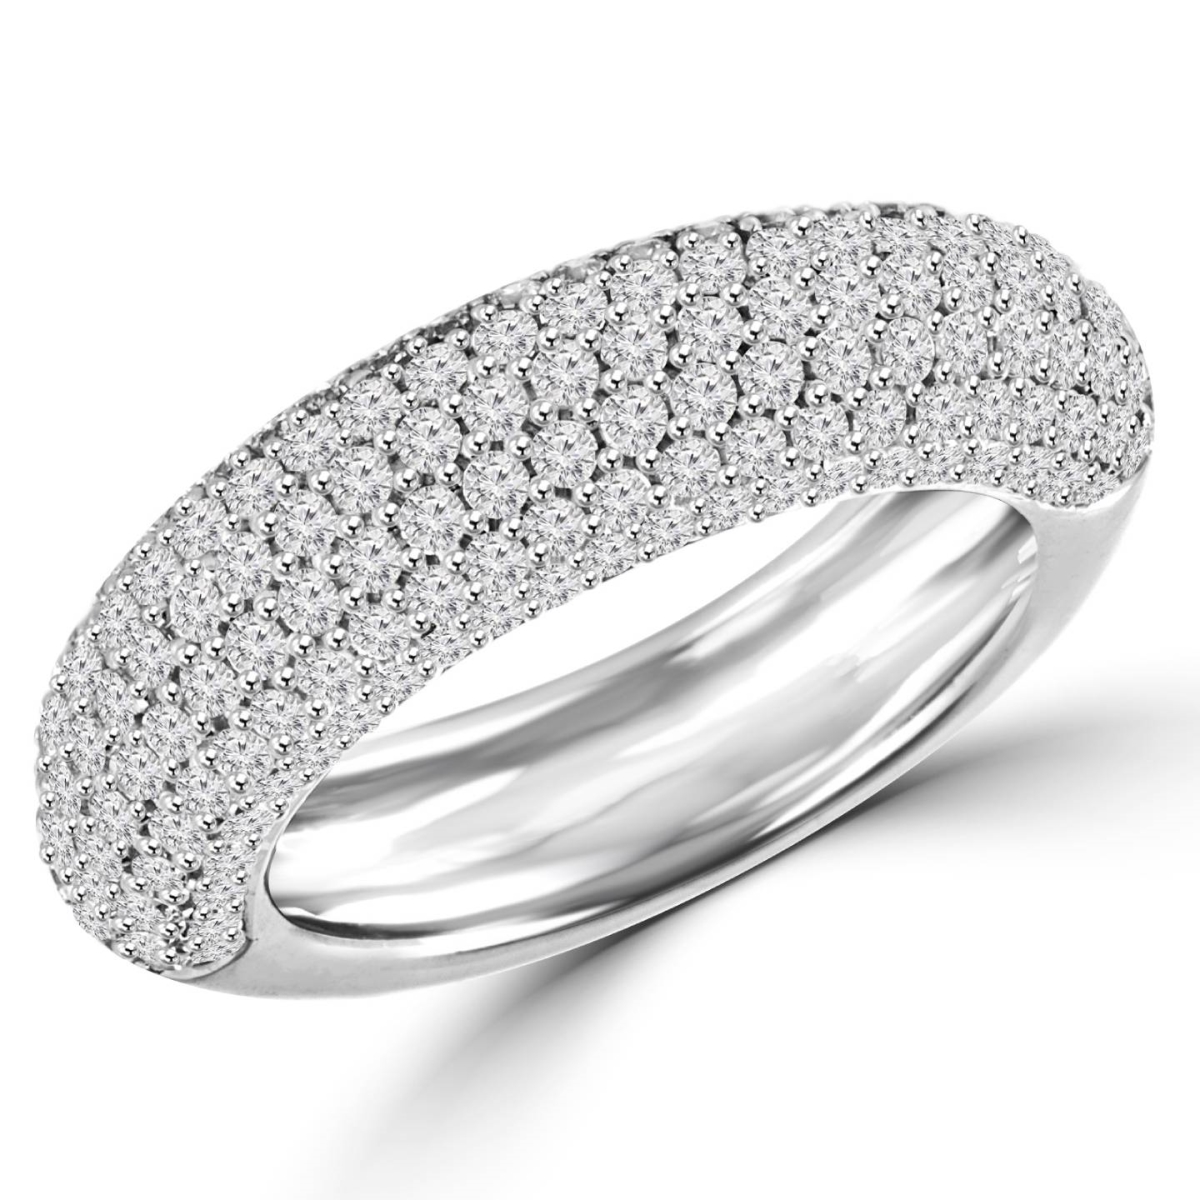 Picture of Majesty Diamonds MDR140063 1.5 CTW Pave Set Round Diamond Anniversary Wedding Band Ring in 14K